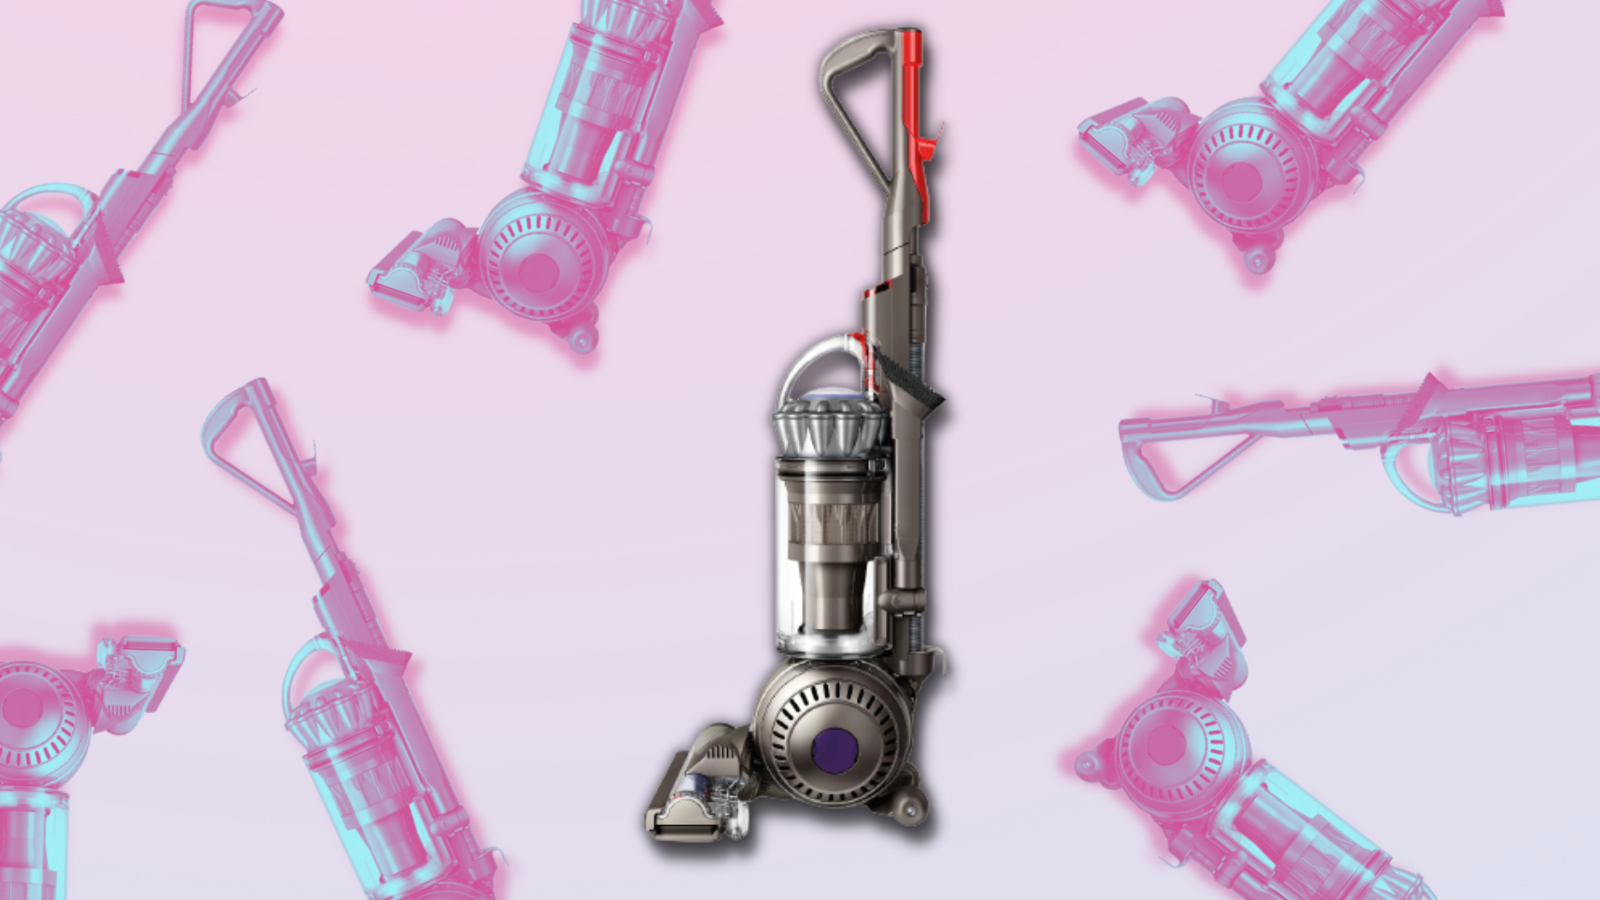 Tackle tough messes with a Dyson Ball Animal 2 on sale for $100 off